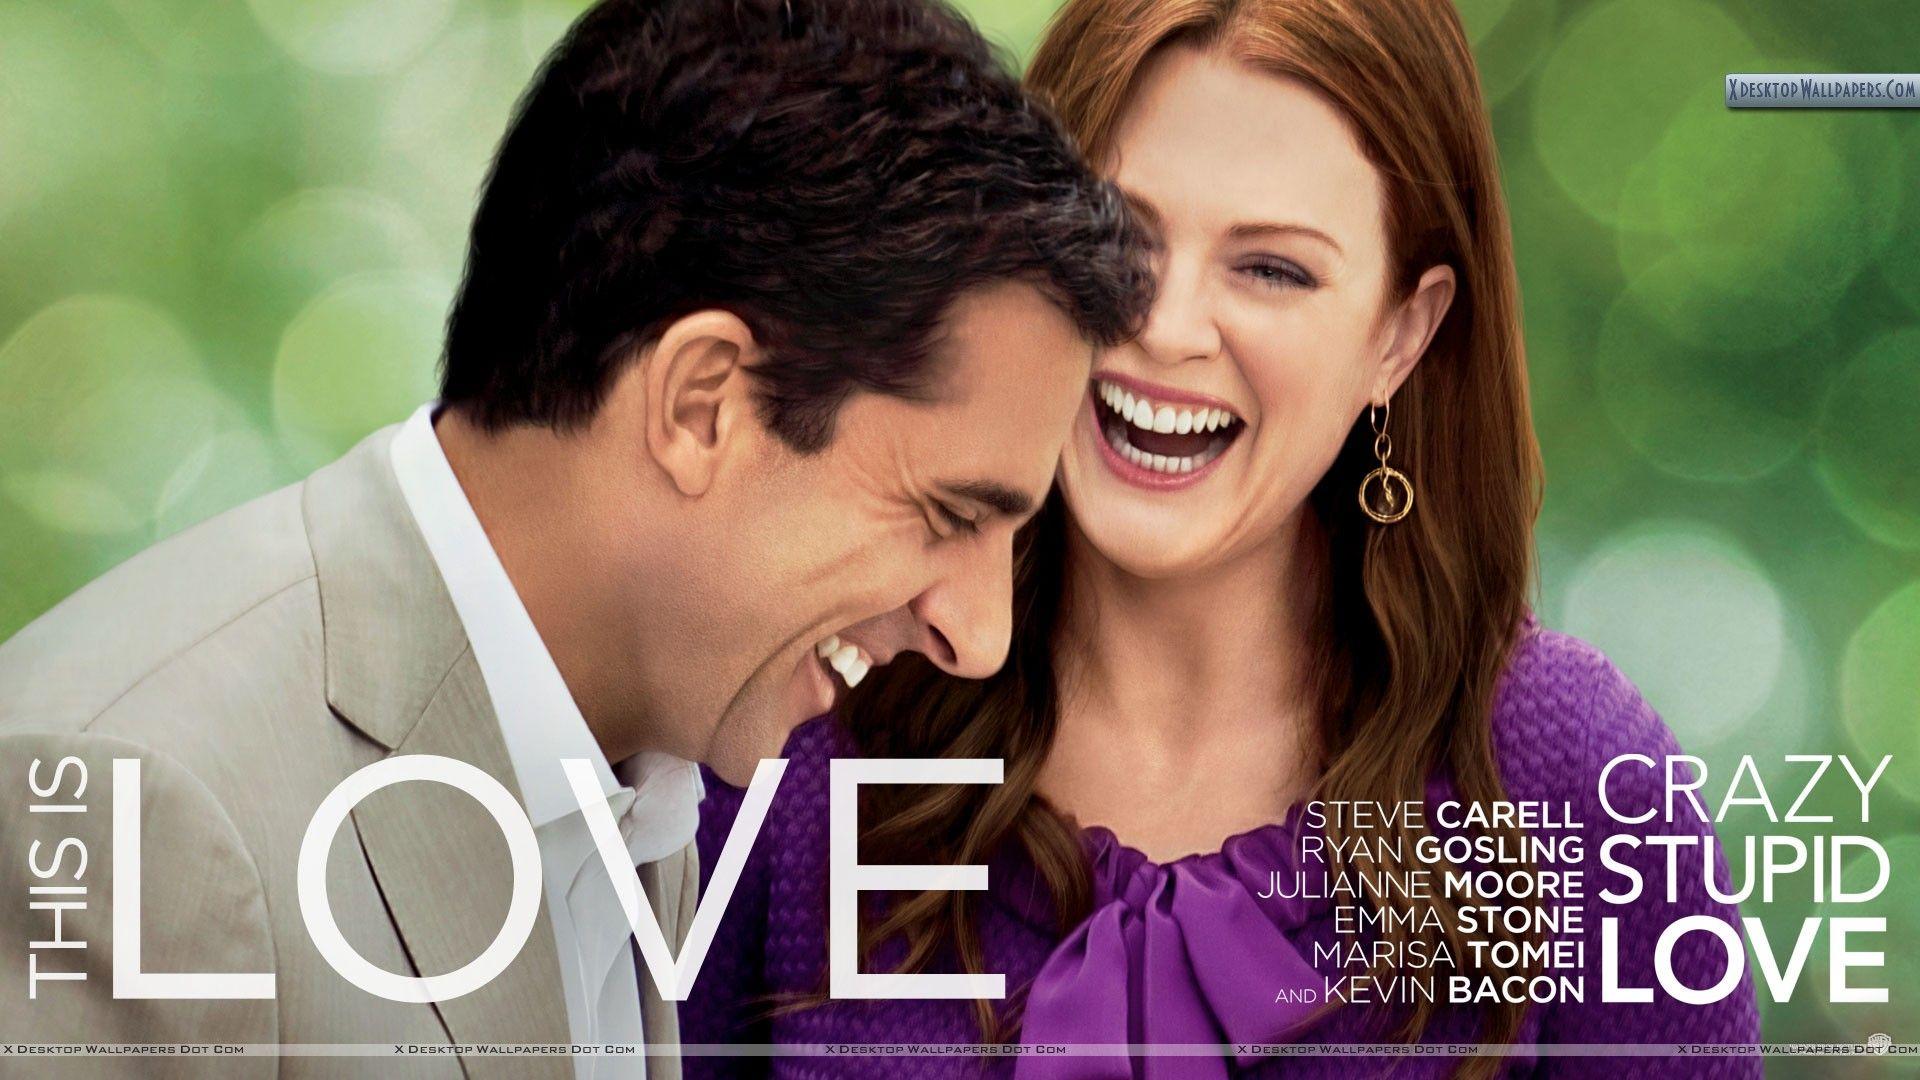 Julianne Moore and Steve Carell in Crazy, Stupid, Love Wallpaper